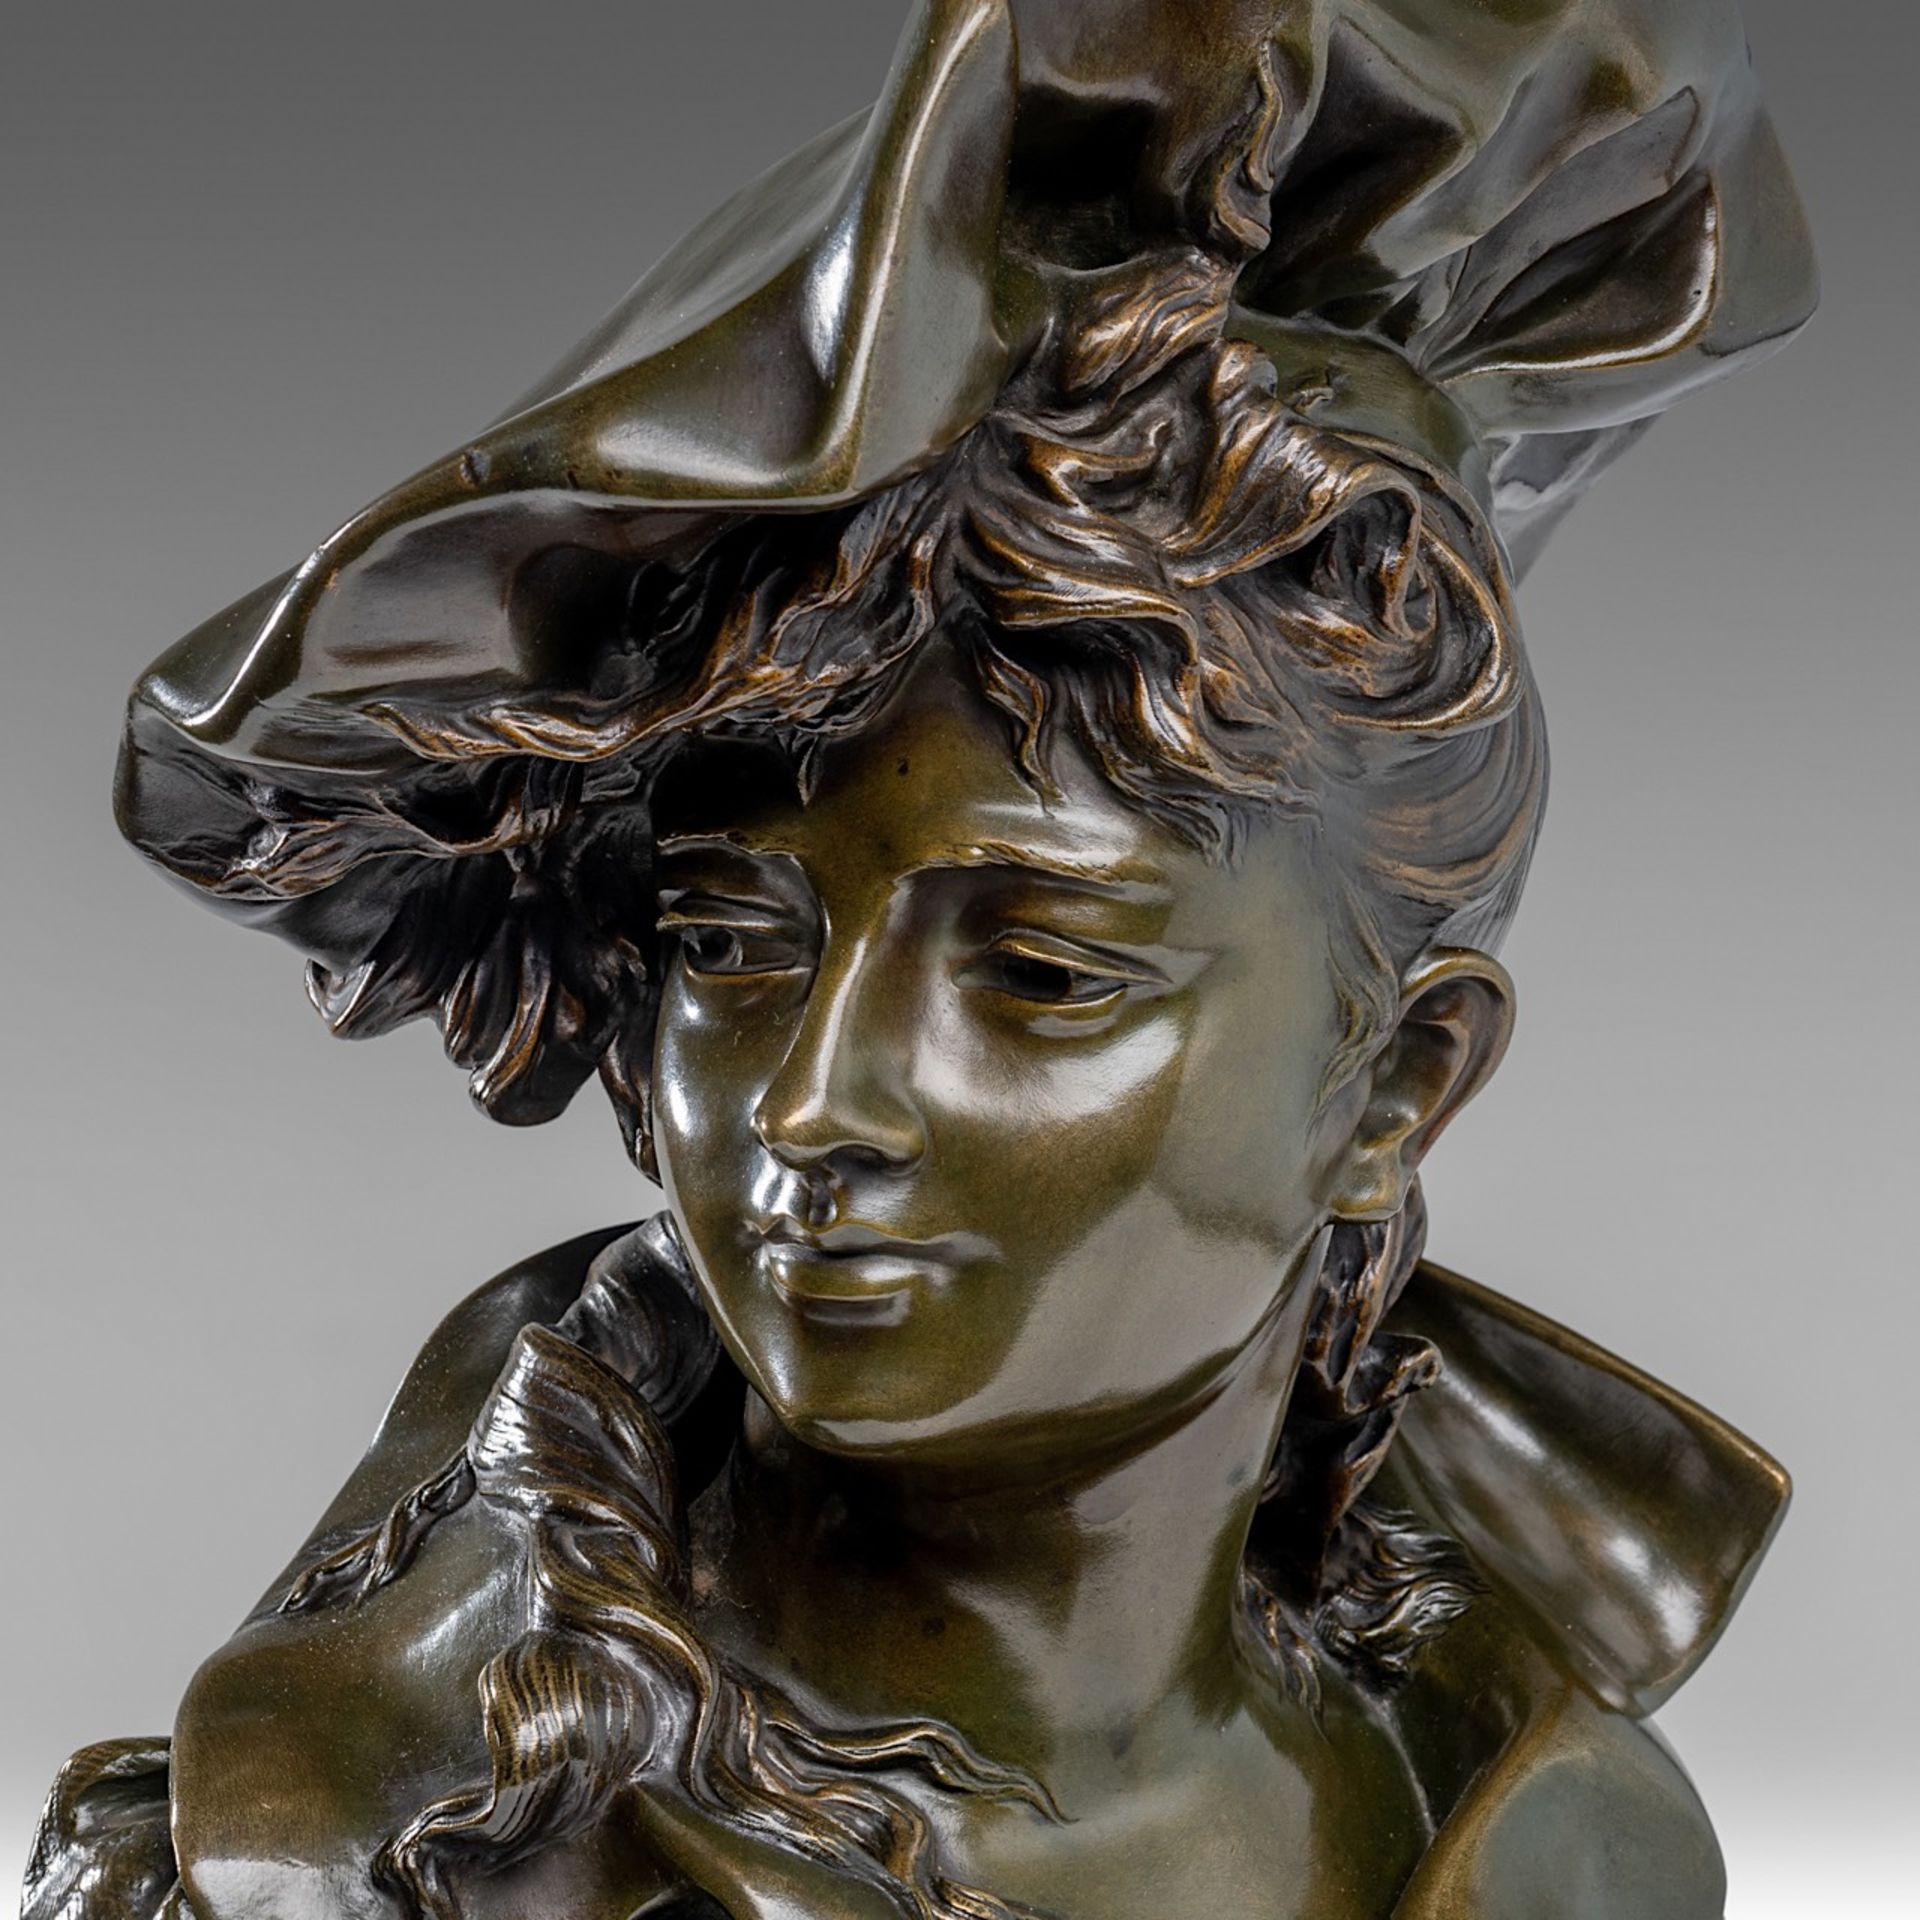 Anton Nelson (1849-1910), 'Fantasia', green patinated bronze bust, H 48 cm - Image 9 of 11